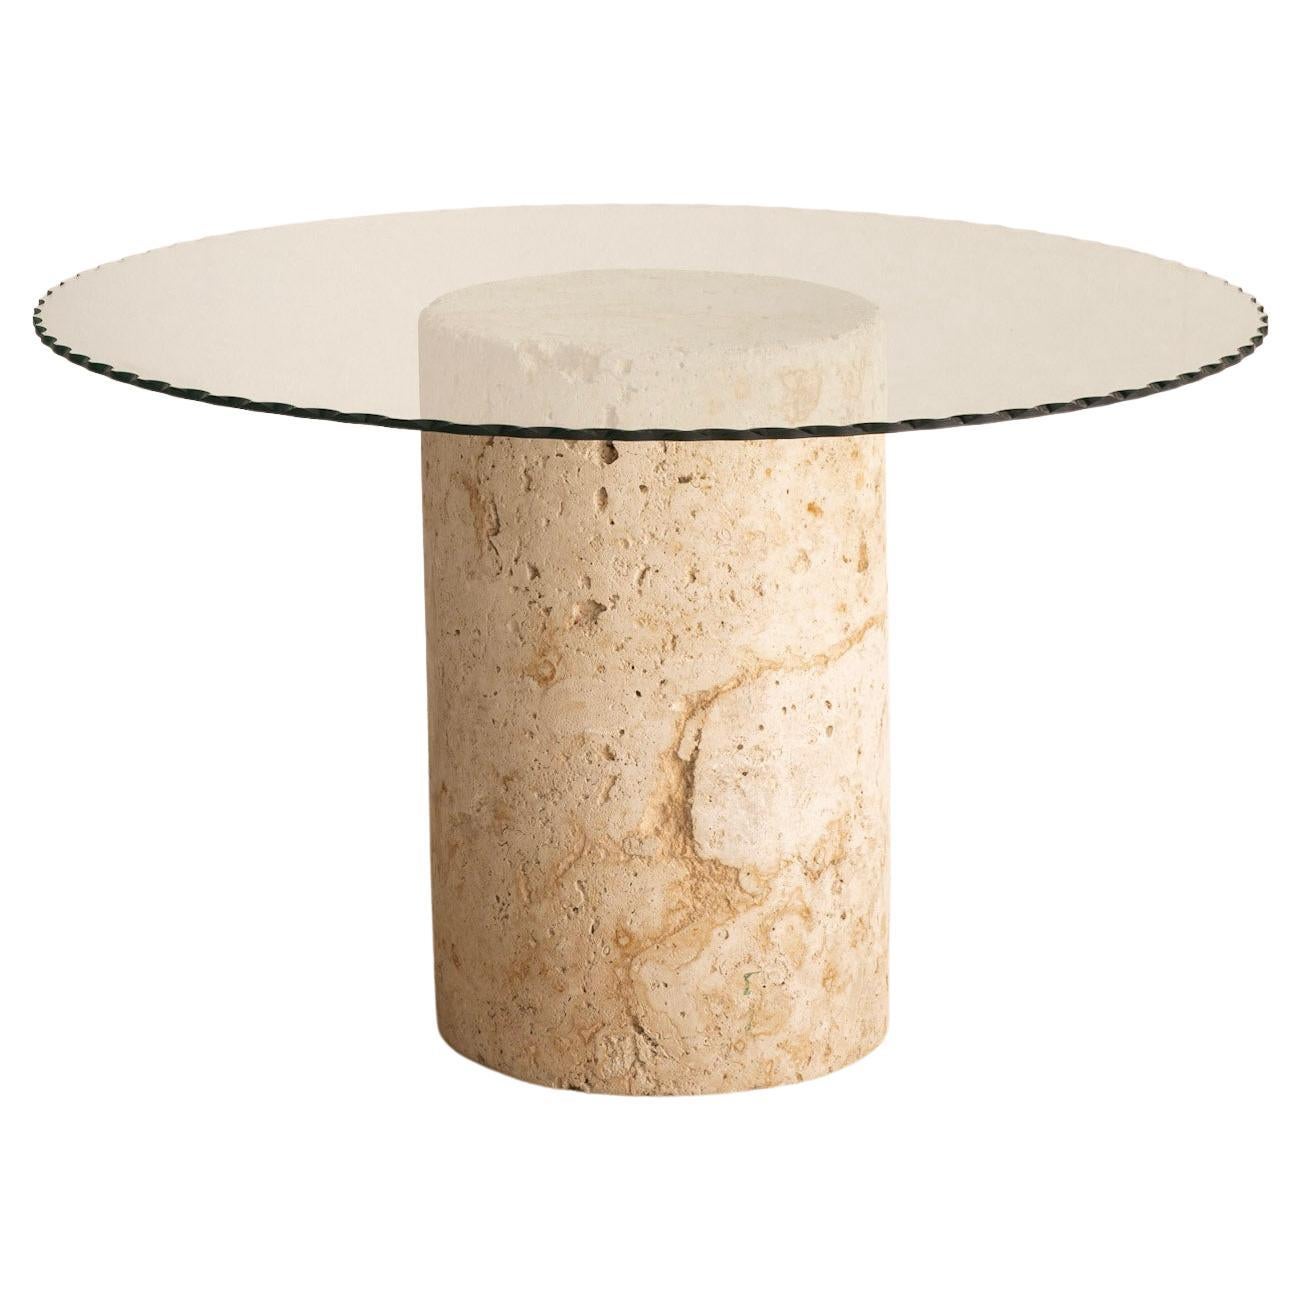 Solid Limestone Monolith Dining Table with Scalloped Edge Glass Top